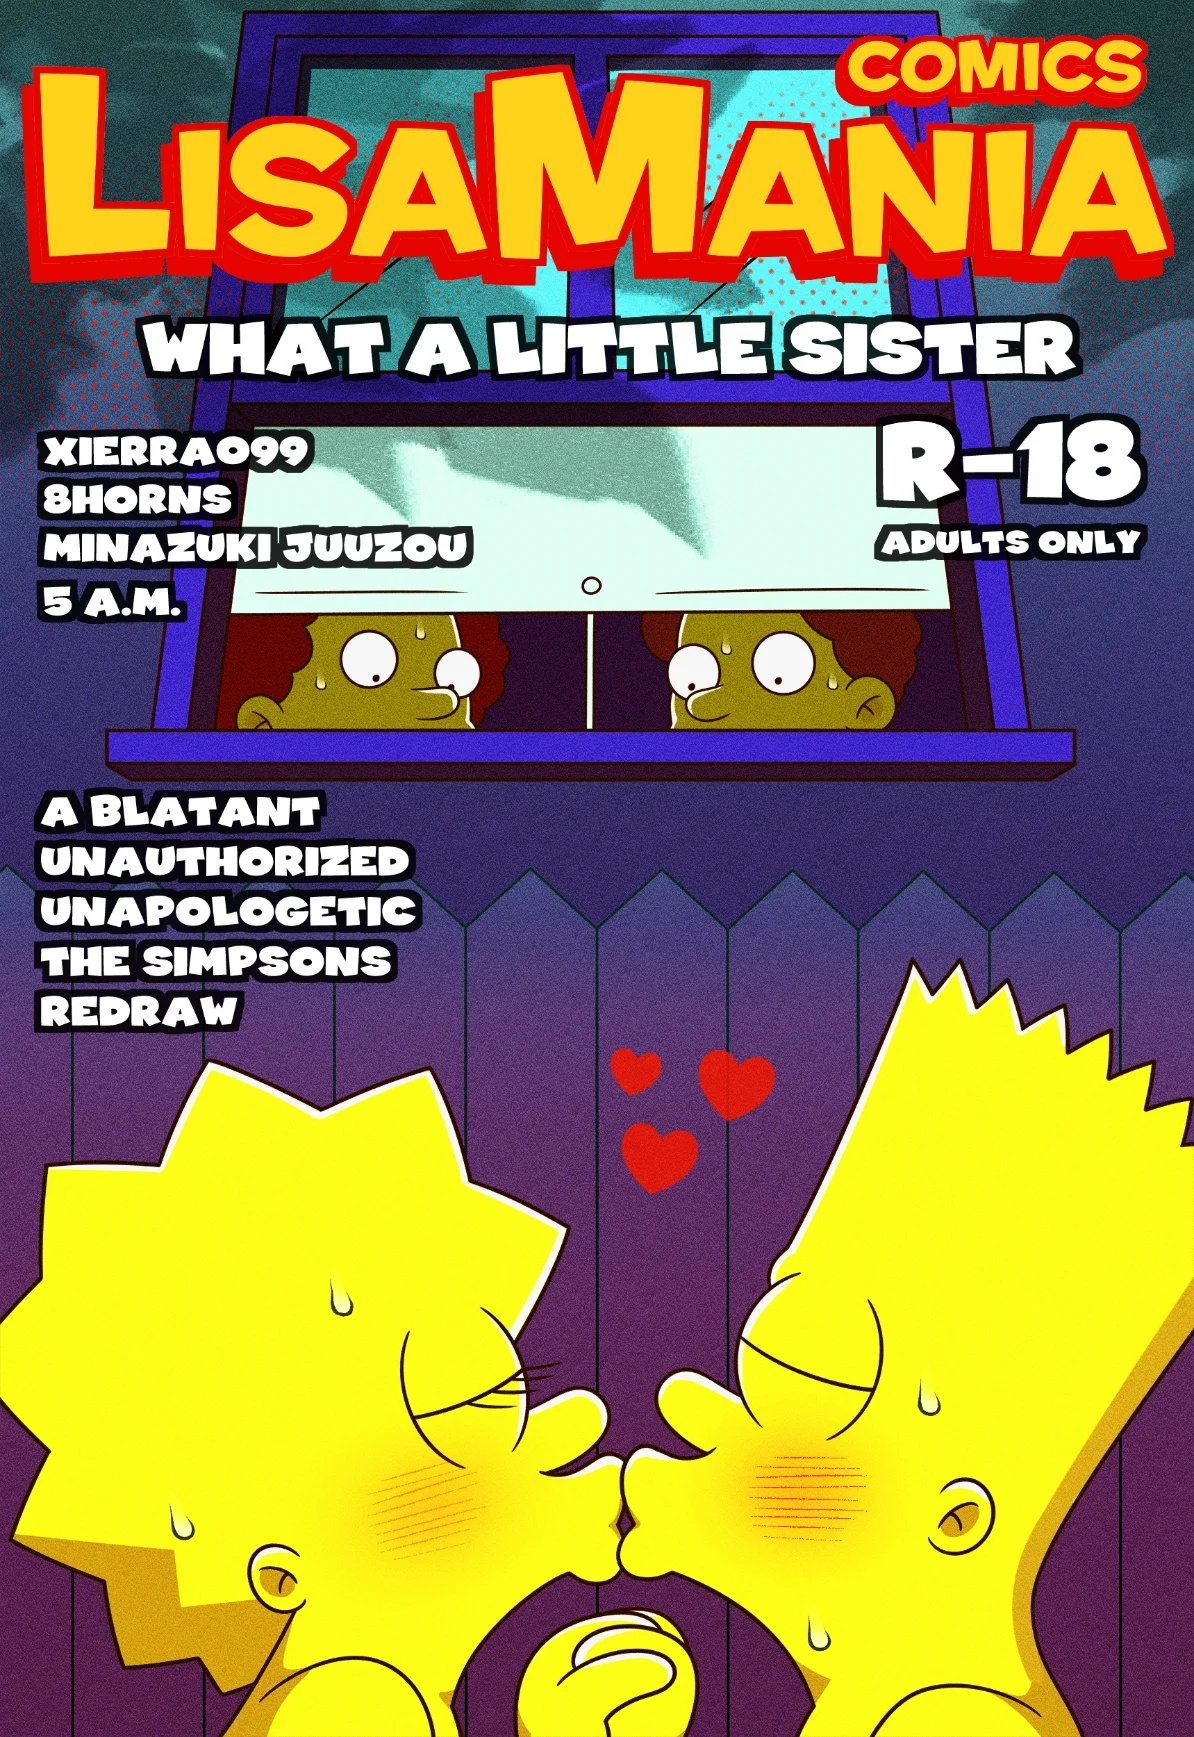 What a little sister (ver. Simpsons) - 1